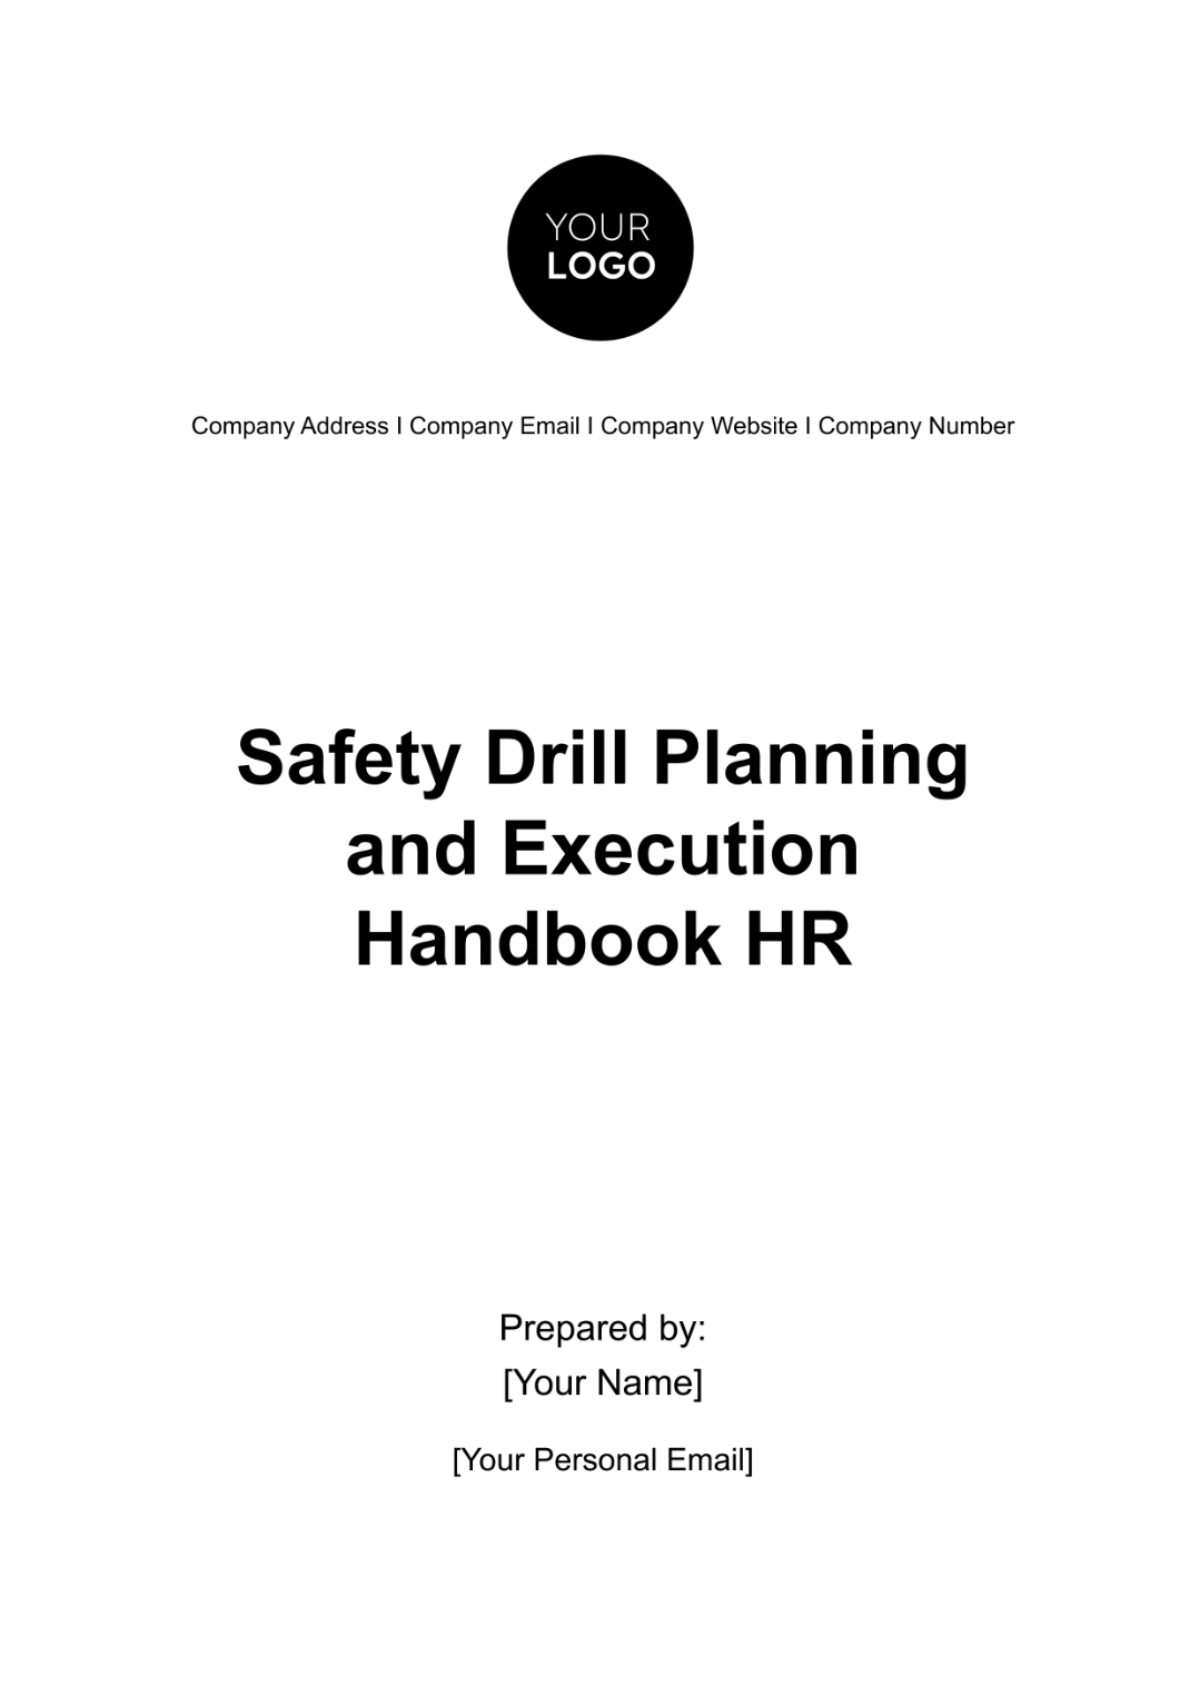 Free Safety Drill Planning and Execution Handbook HR Template